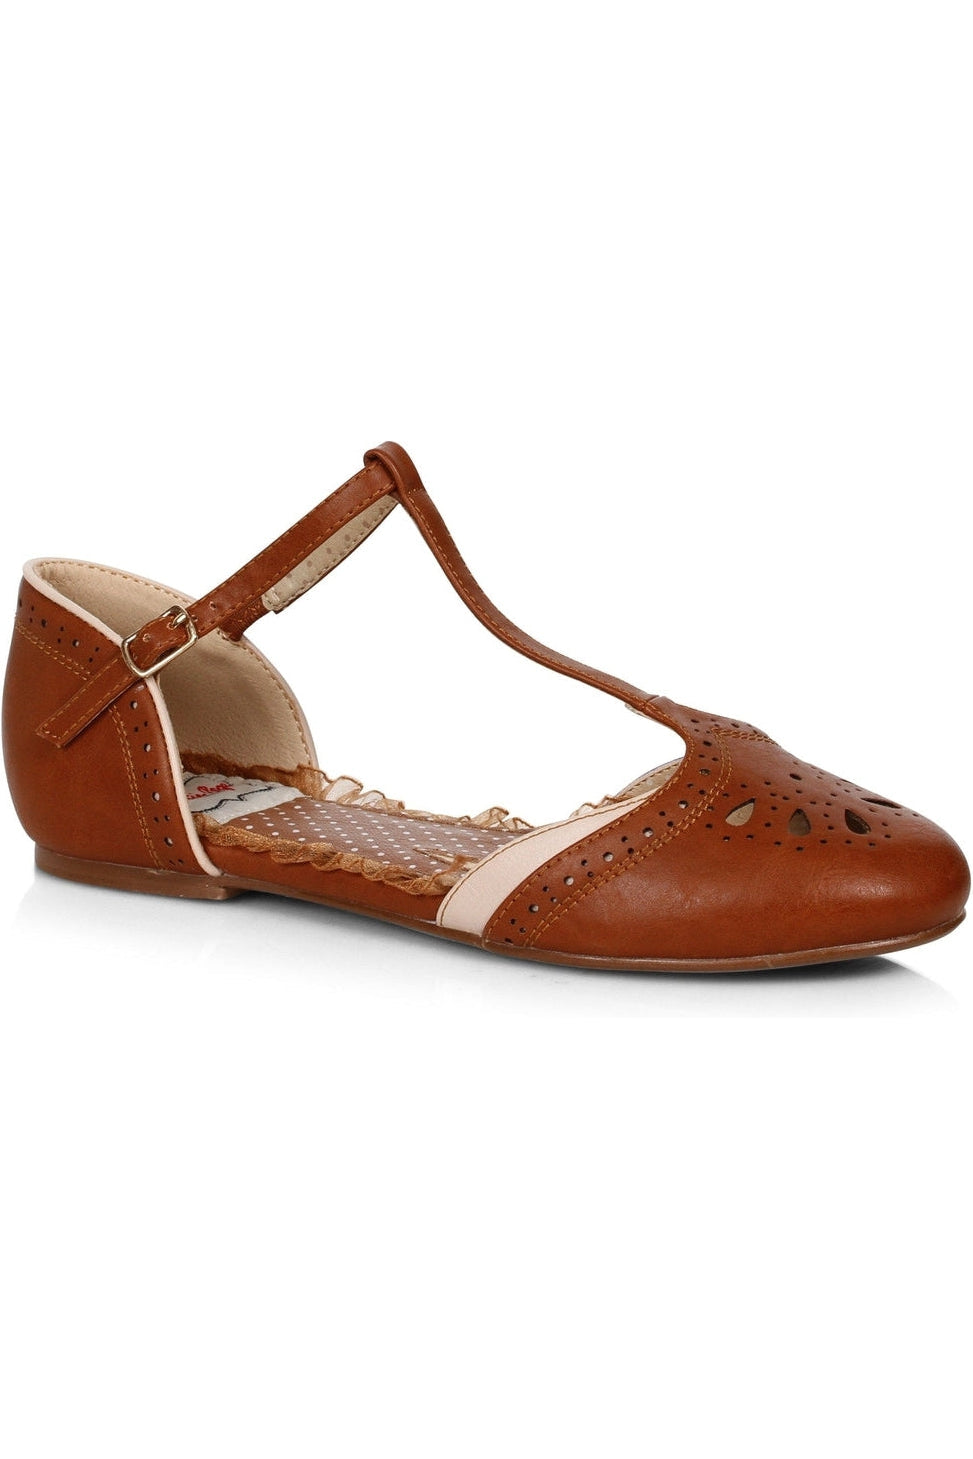 Bettie Page Nancy Flat | Brown Faux Leather-Flats-Bettie Page by Ellie-SEXYSHOES.COM